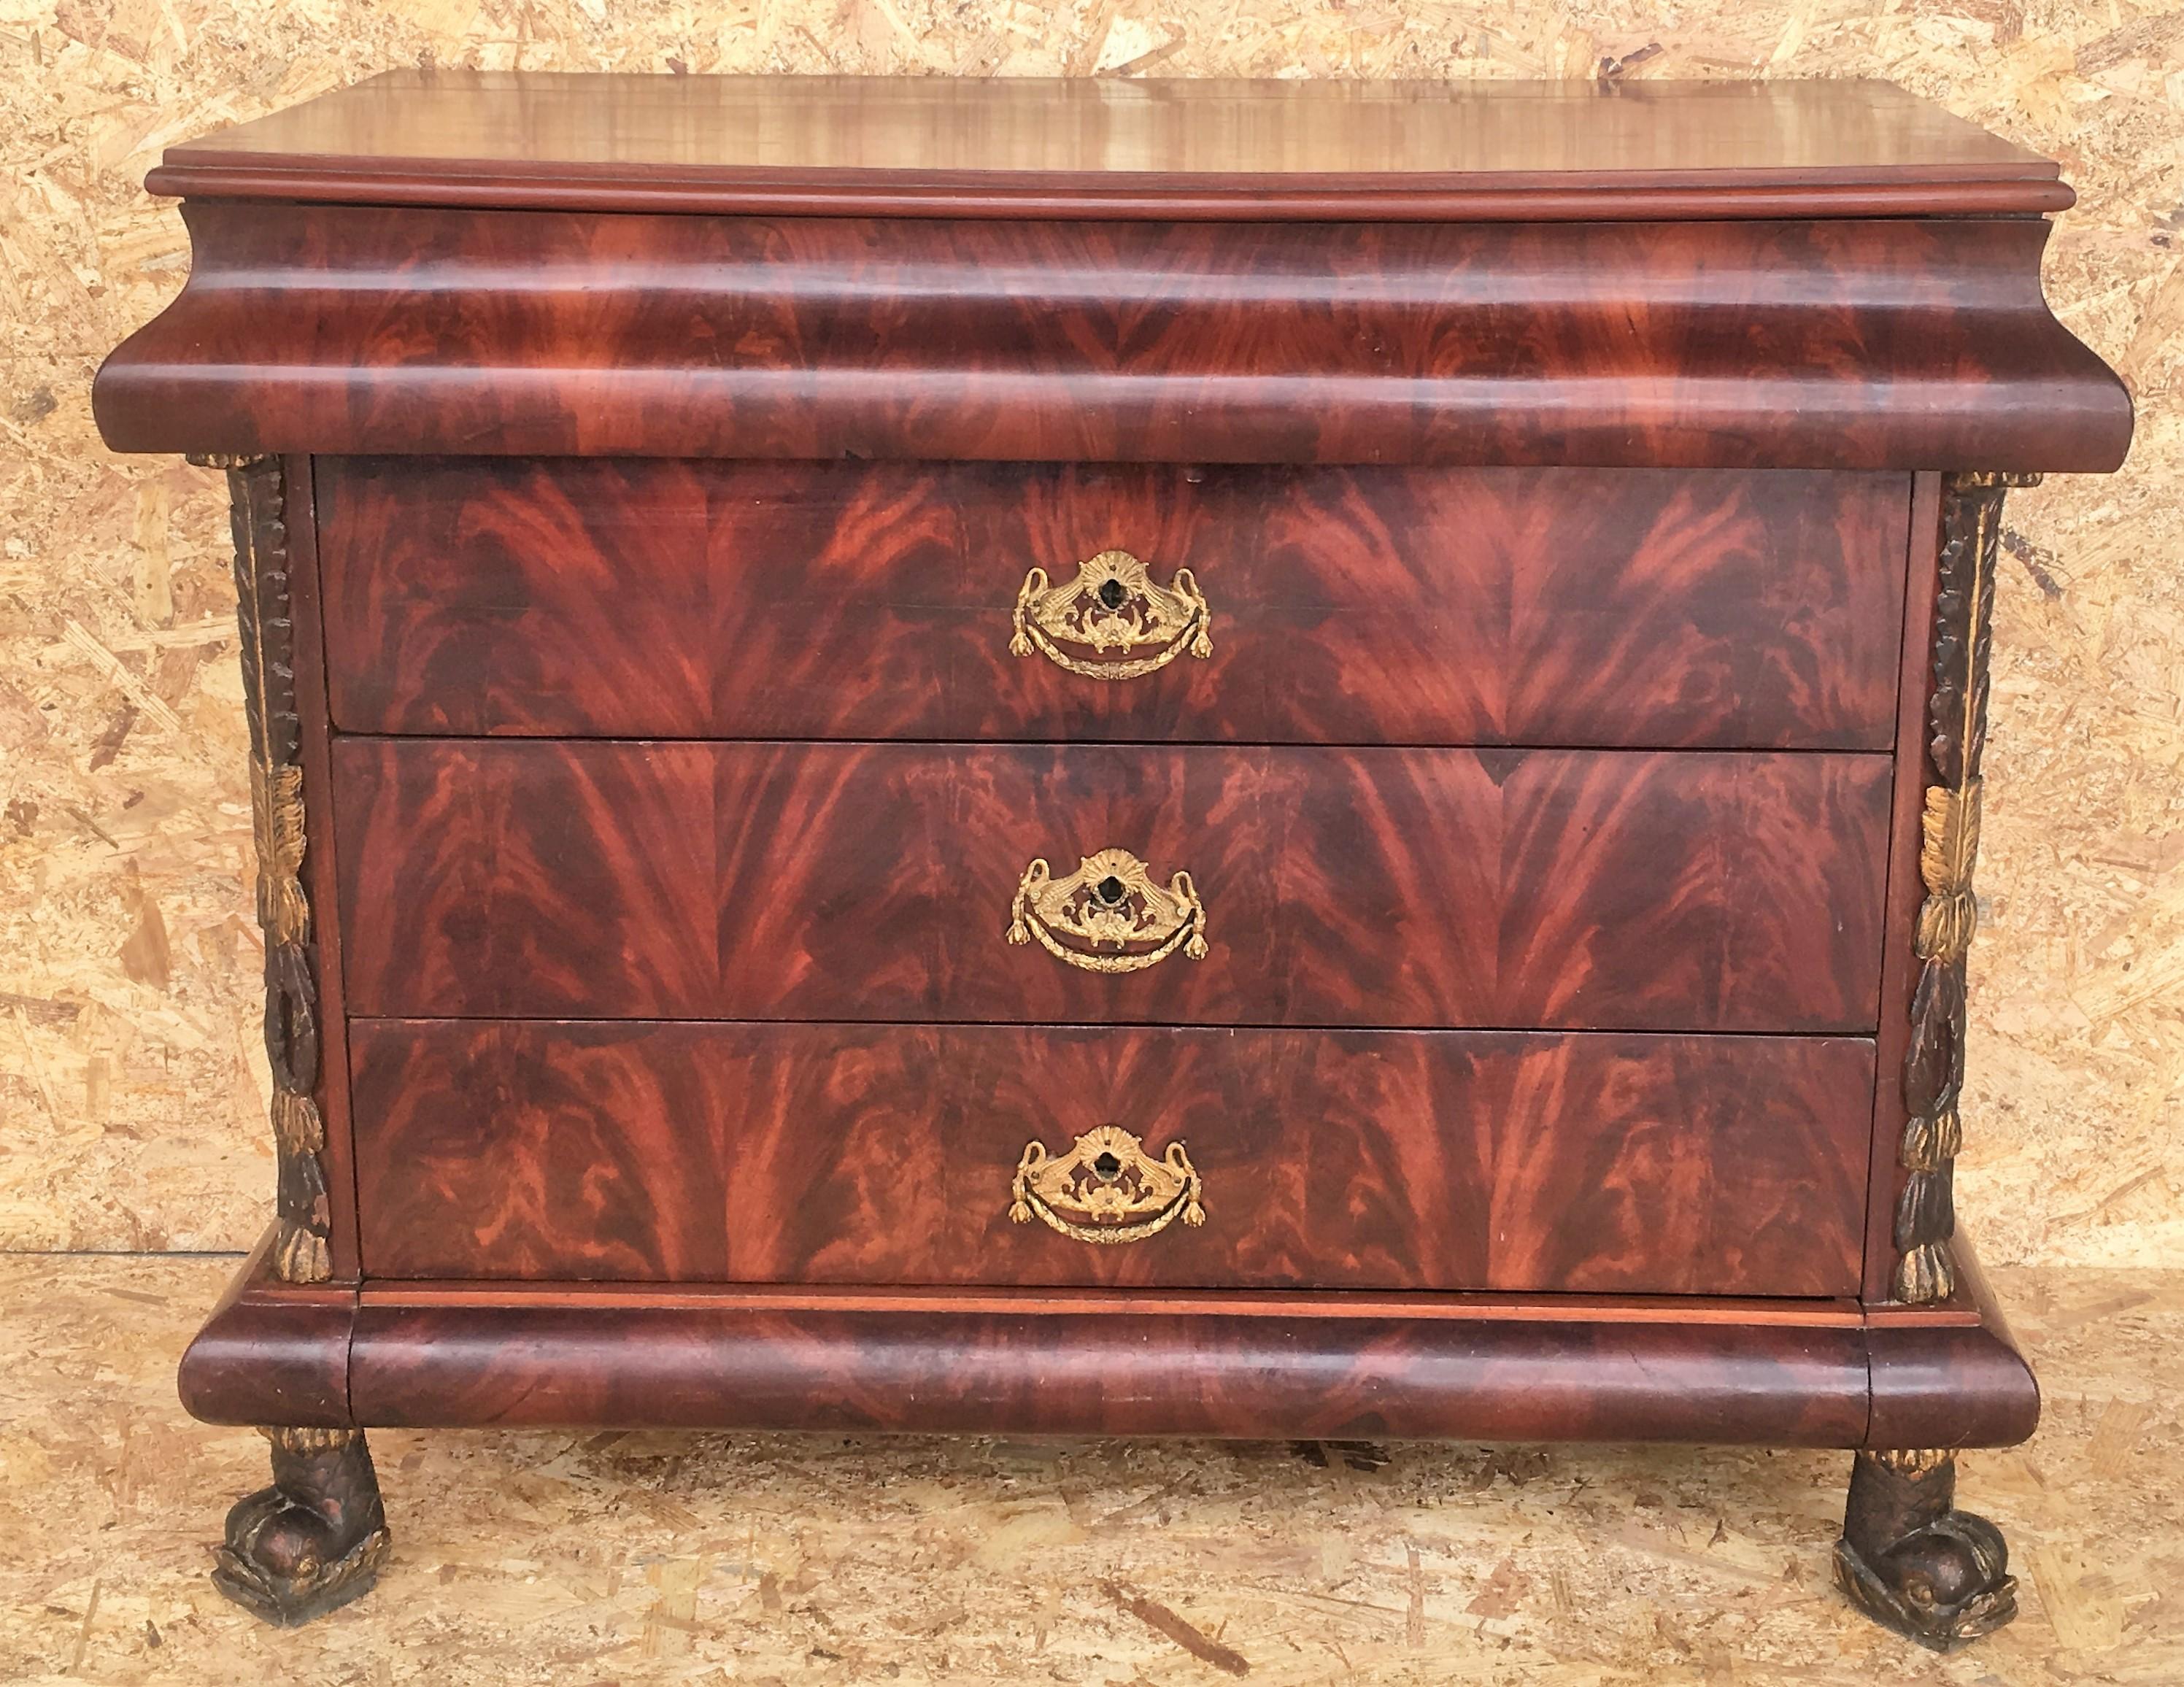 1830s French Empire mahogany chest with four drawers and gilded edges
Beautiful wooden root.